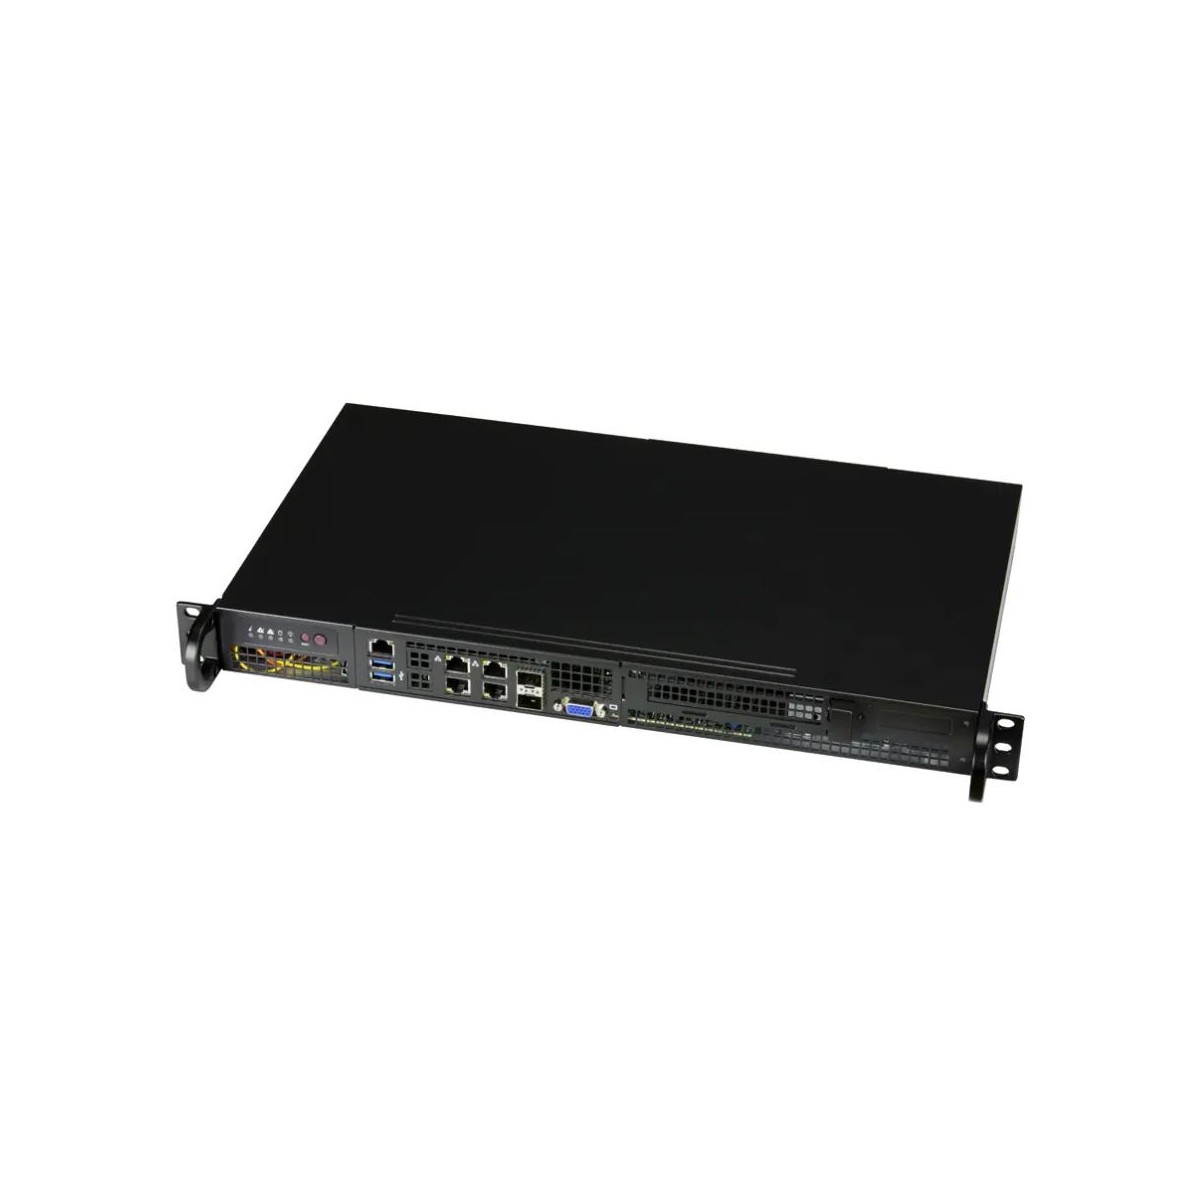 Supermicro SYS-510D-8C-FN6P